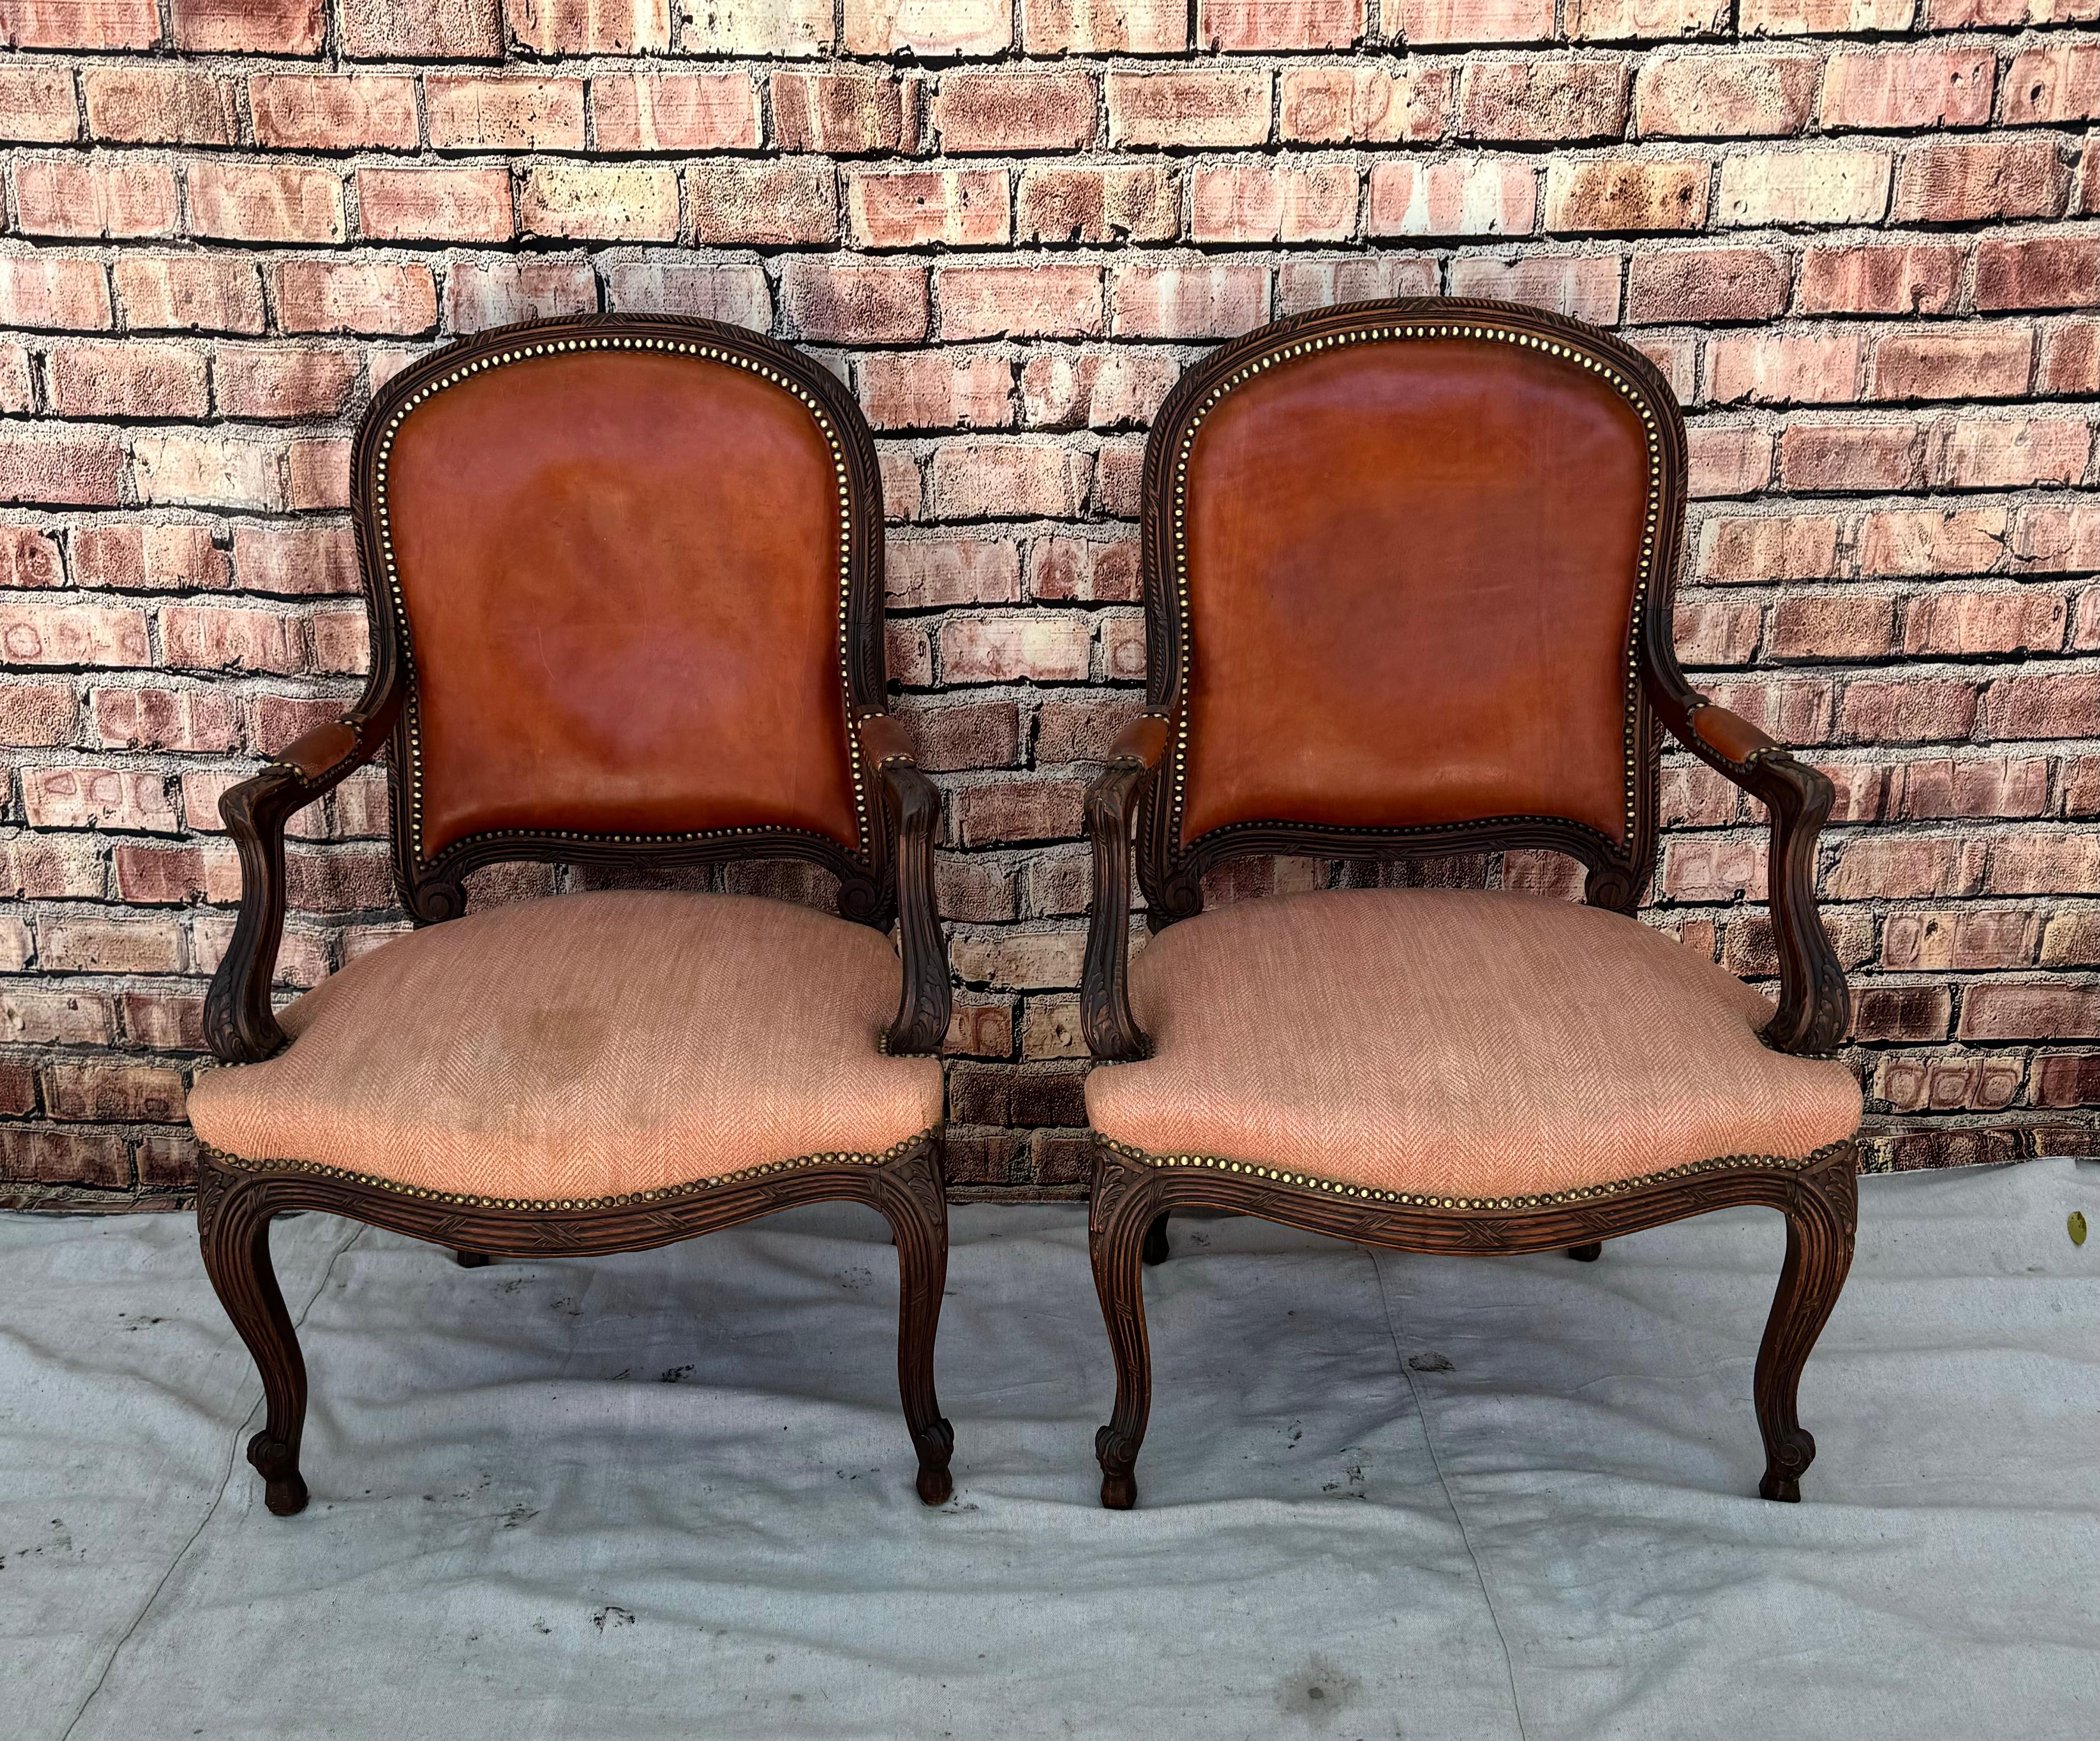 Pair of Louis XV Style Fauteuil armchairs. Chairs feature carved and shaped walnut frames, a serpentine skirt, and carved cabriole legs. Chairs also feature tacked red leather backs and arm rests with chevron pattern cloth seats. Nice accent chairs